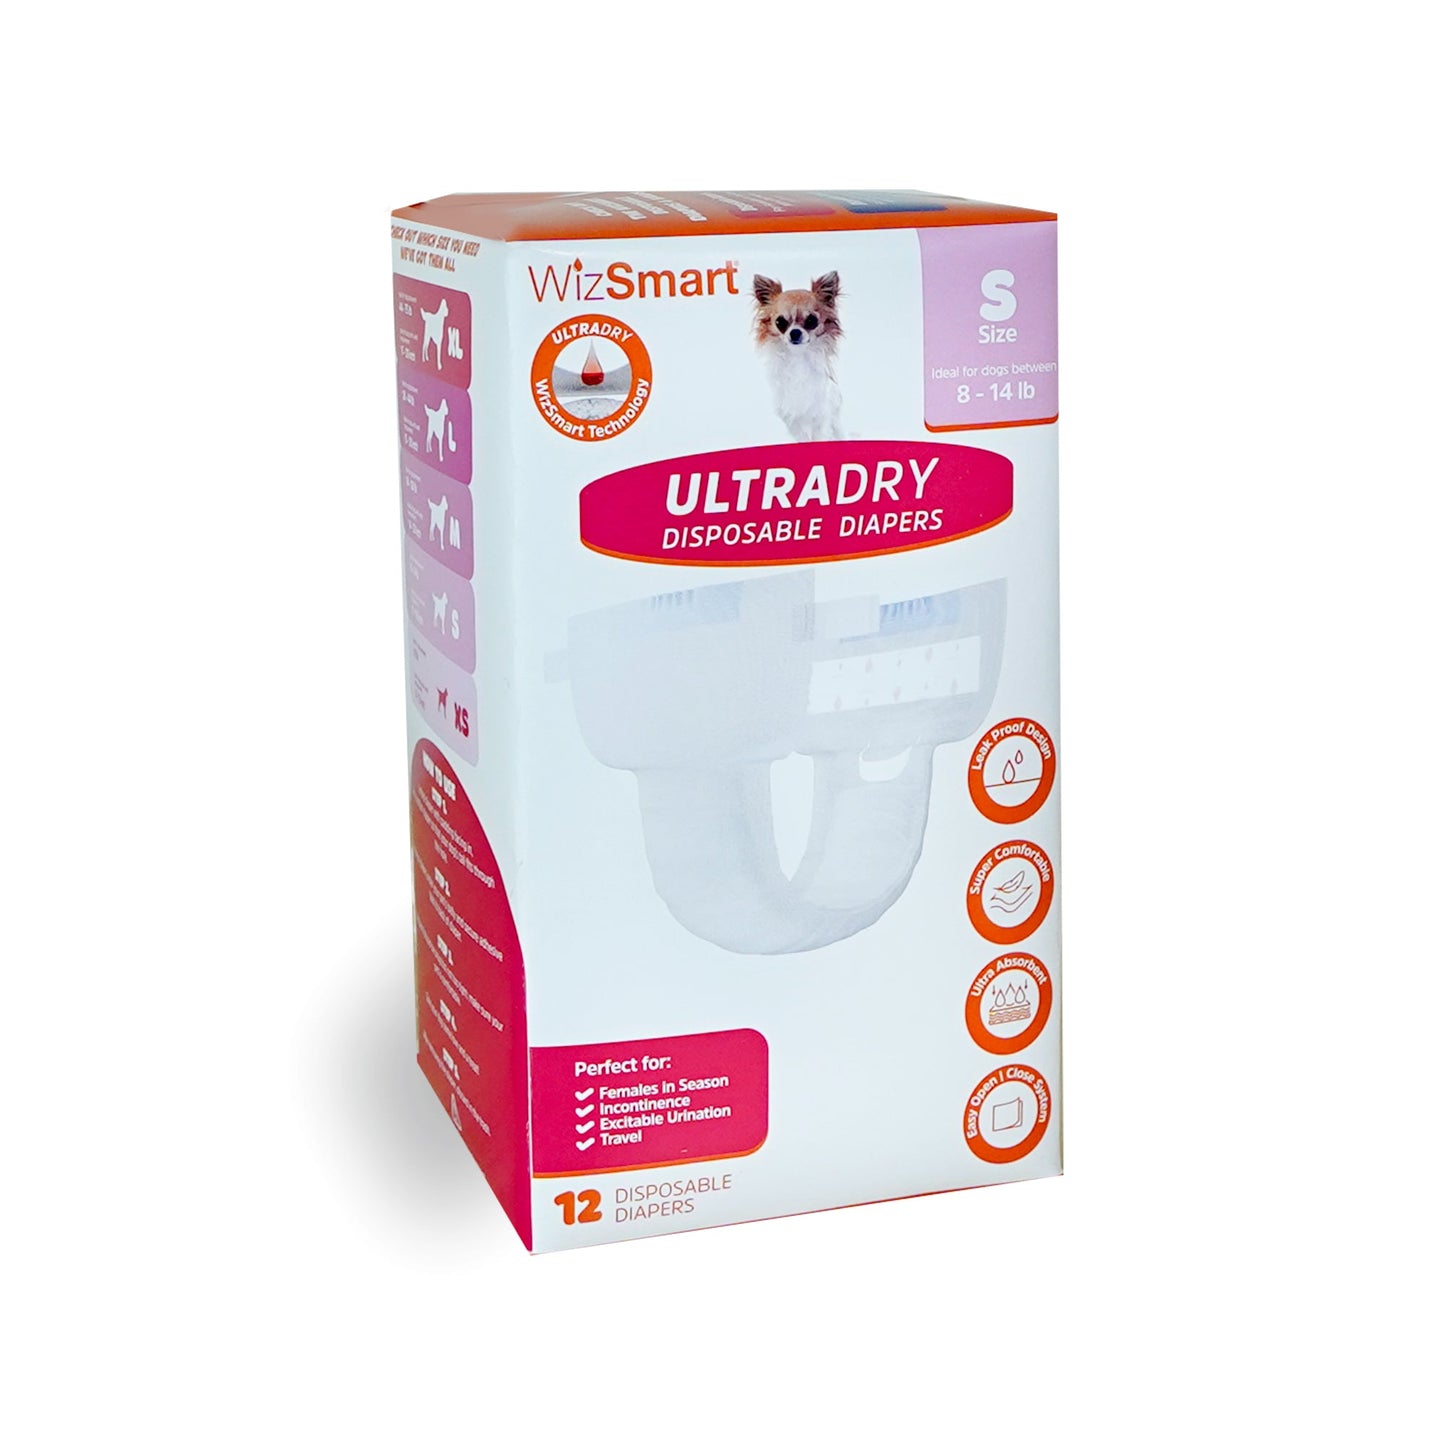 Wizsmart UltraDry Disposable Dog Diapers - 12ct